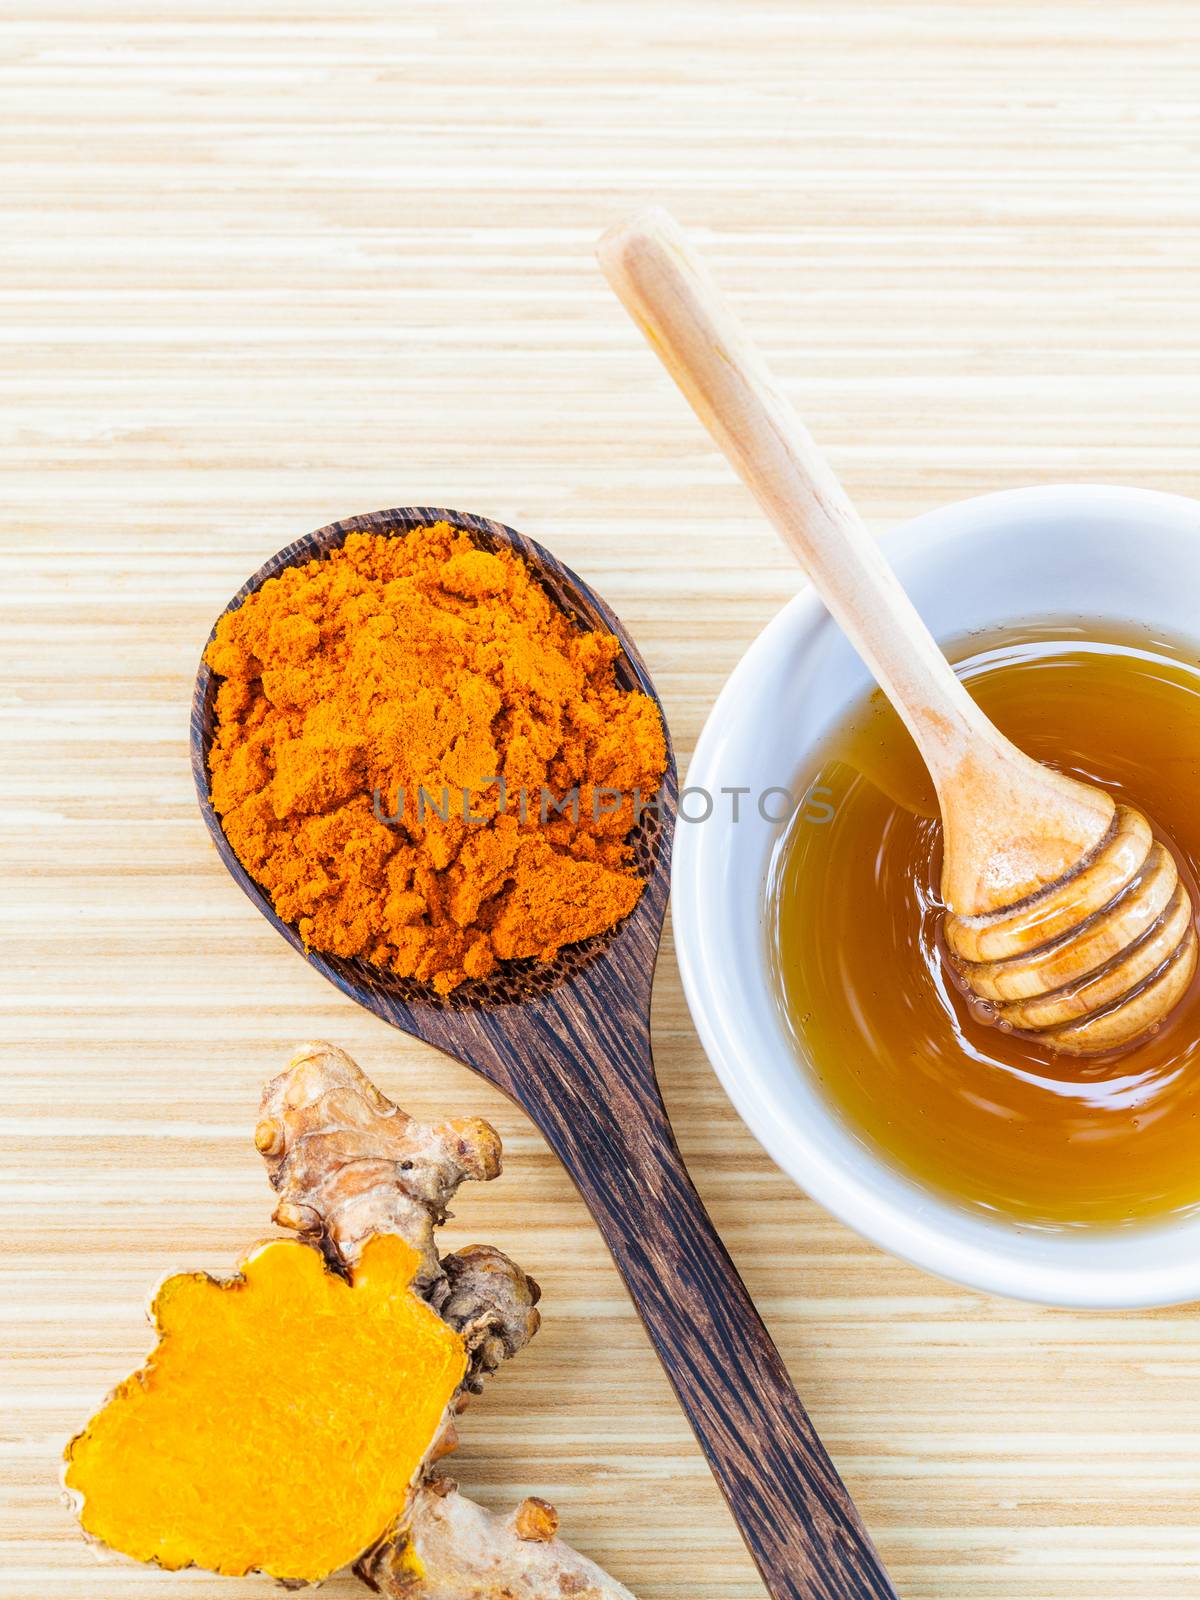  Natural Spa Ingredients . - Tumaric and honey  for skin care.